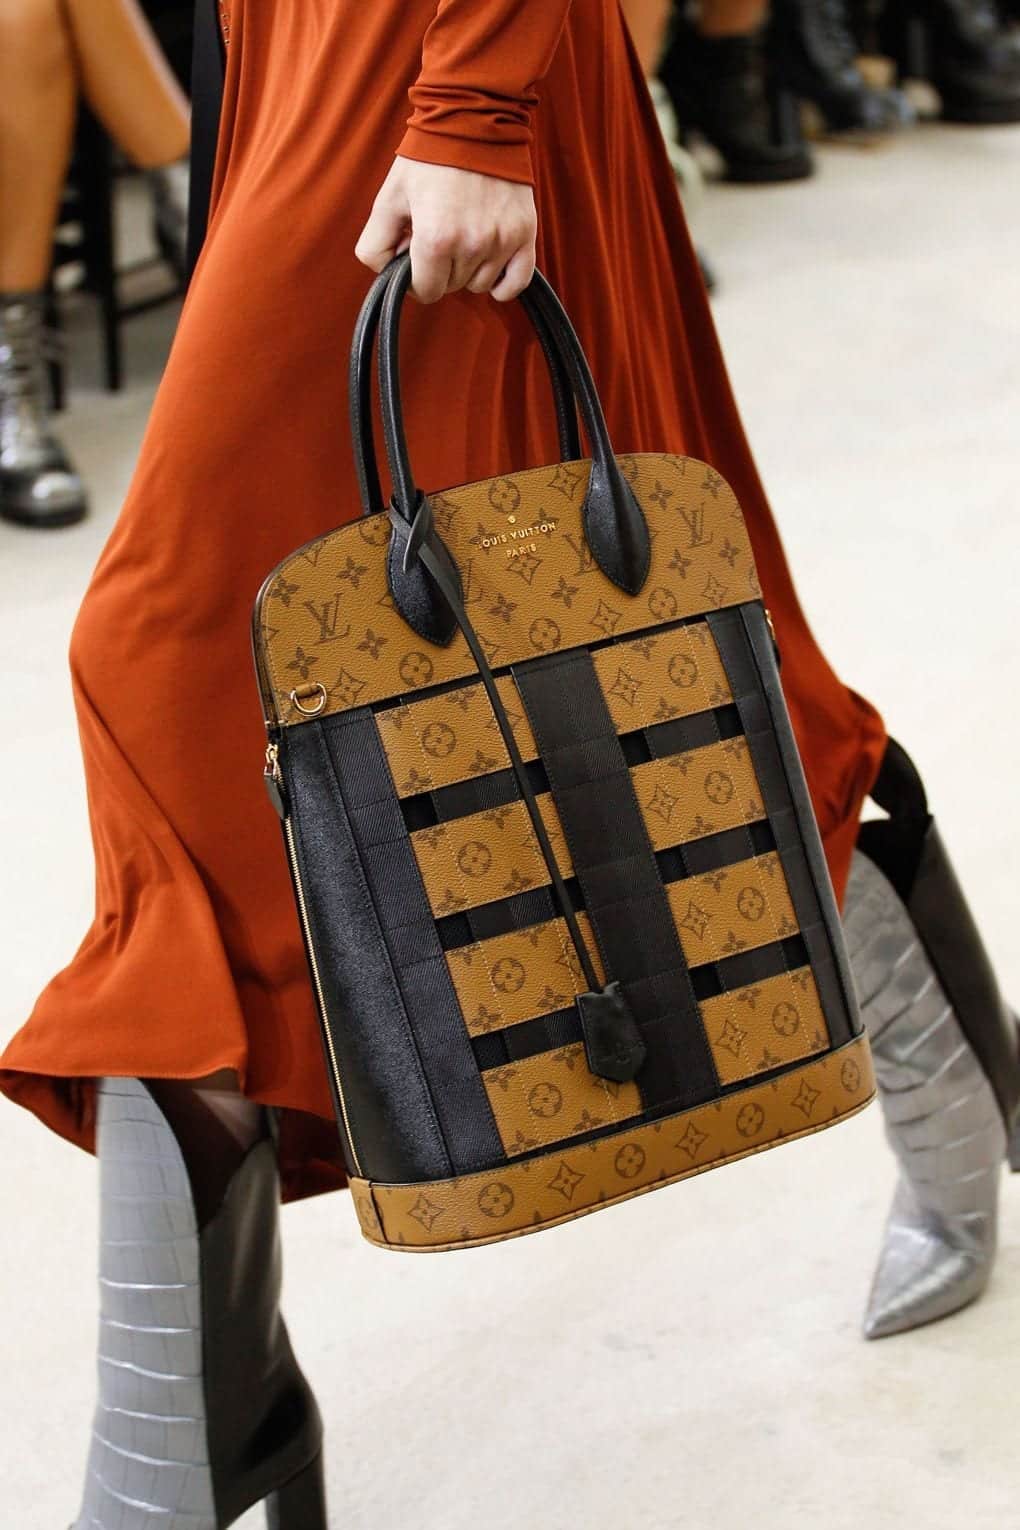 Best Bags to Buy This Year - Top 20 Designer Bags of 2019